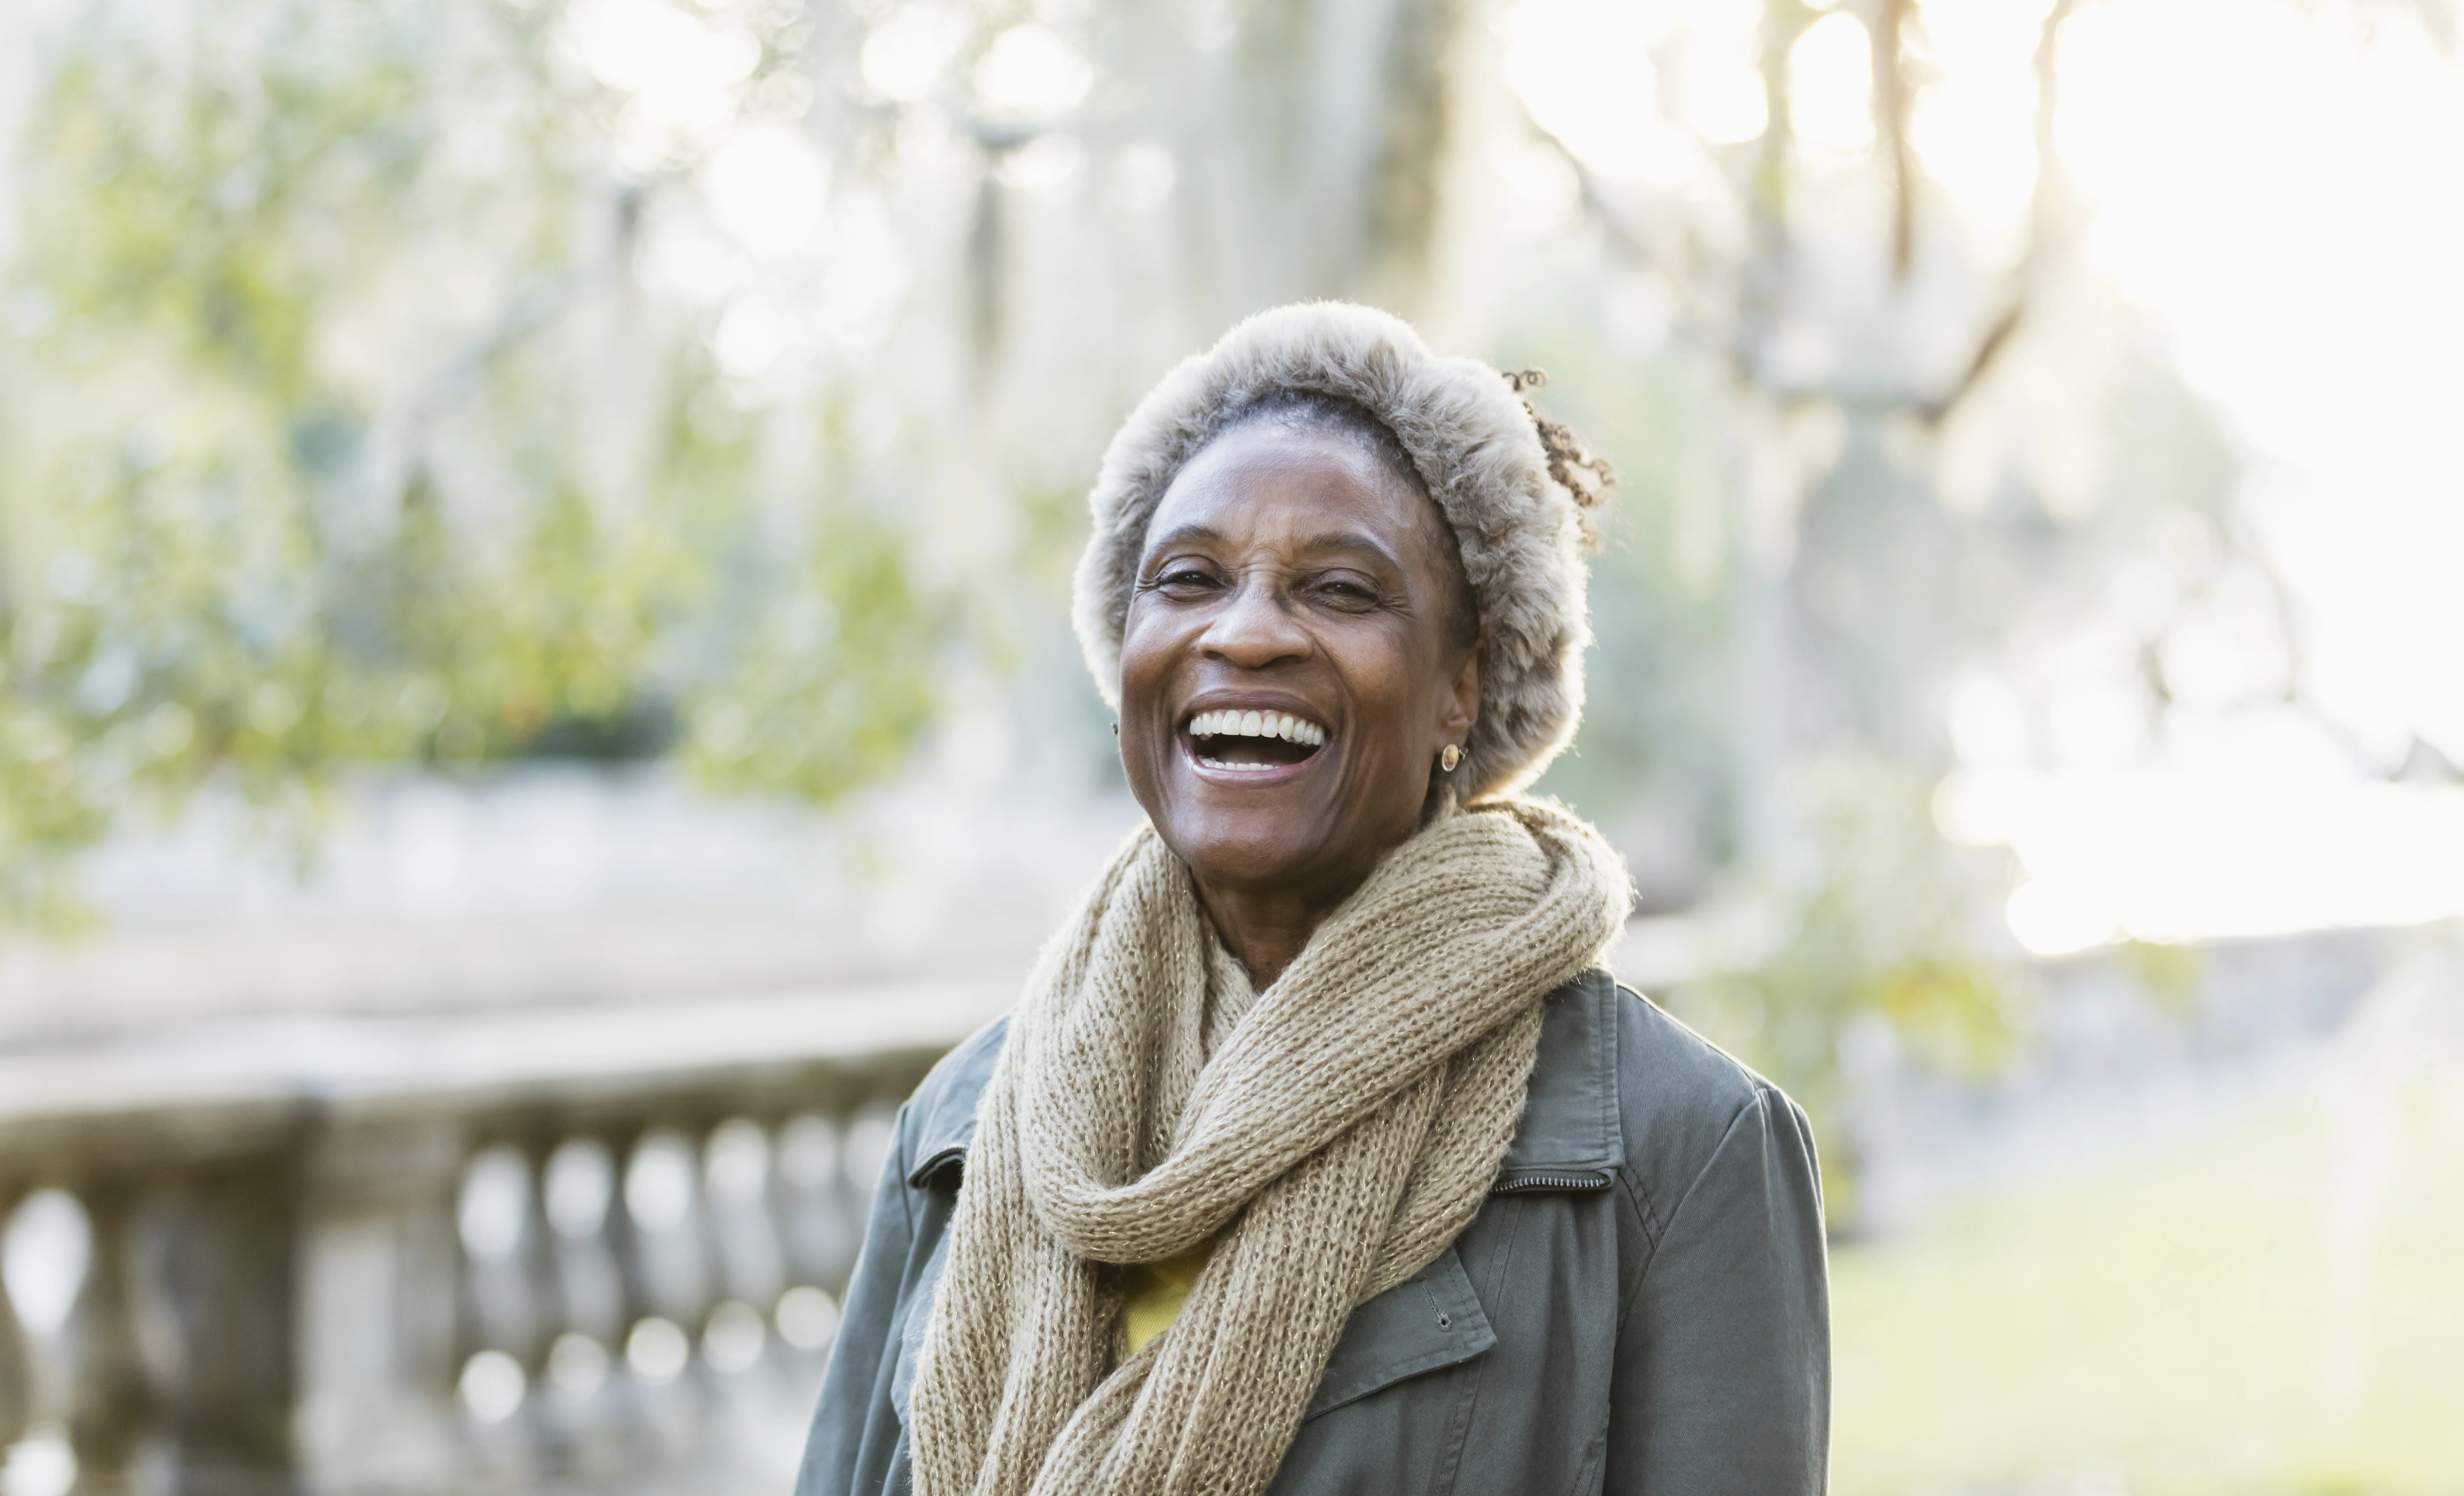 A laughing elderly woman in a park